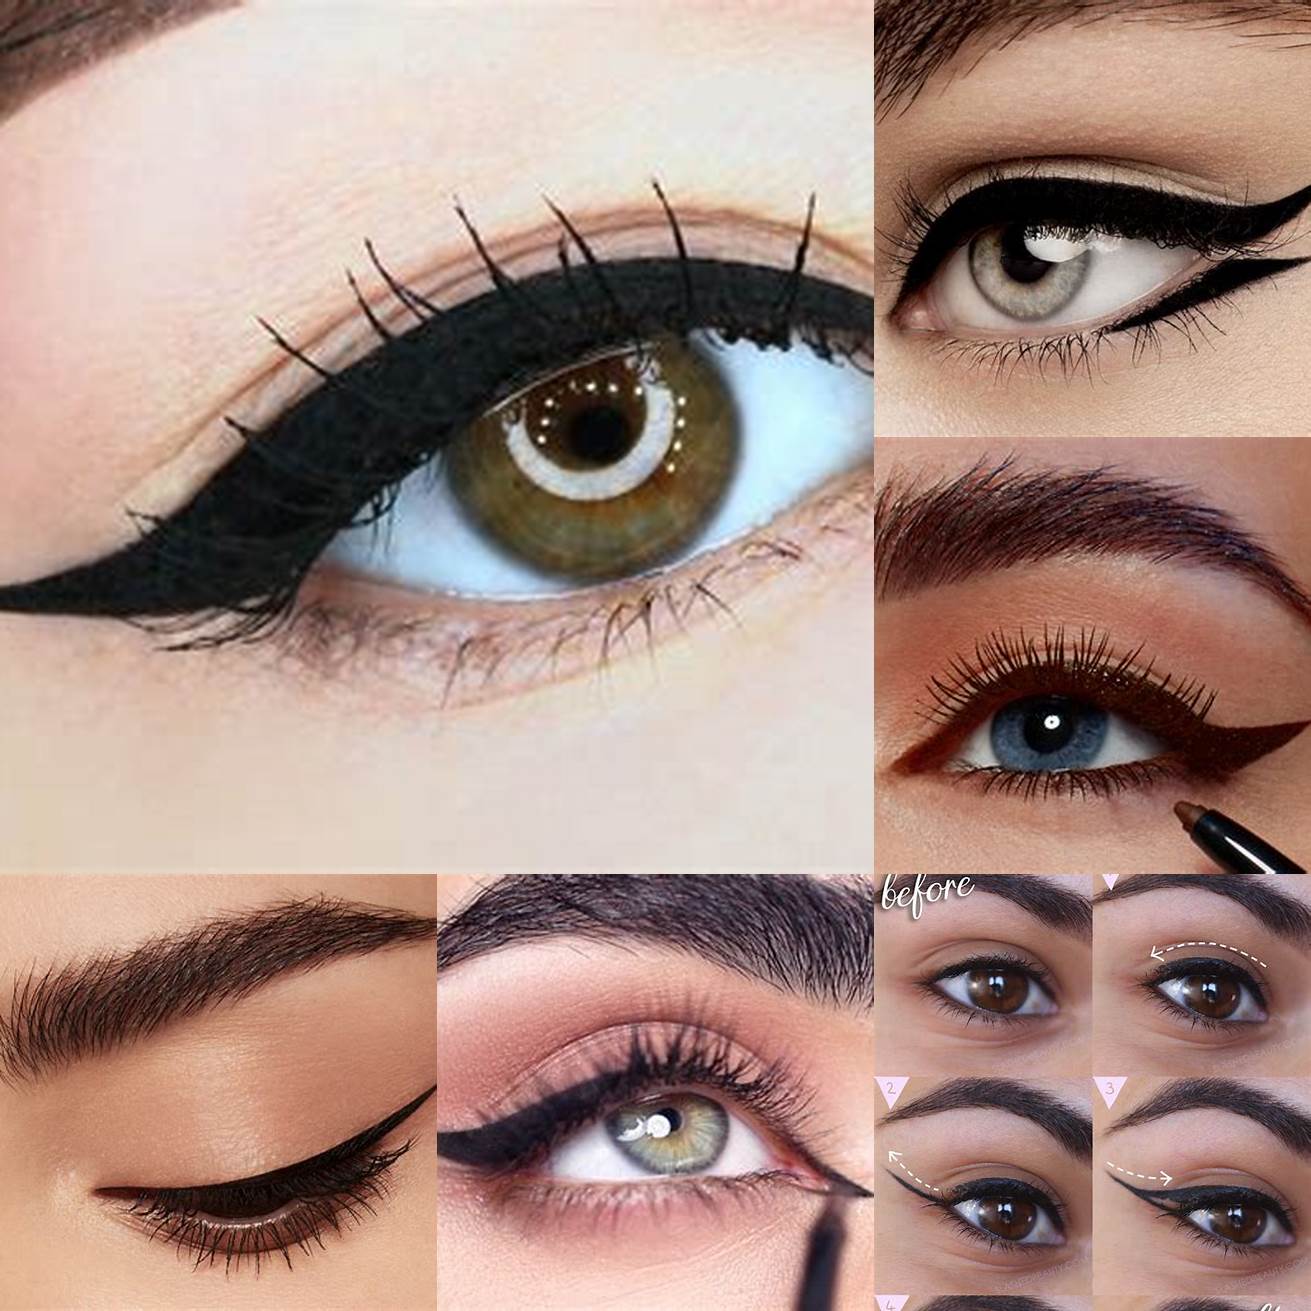 Start by creating a thin line along your upper lash line with a black liquid eyeliner